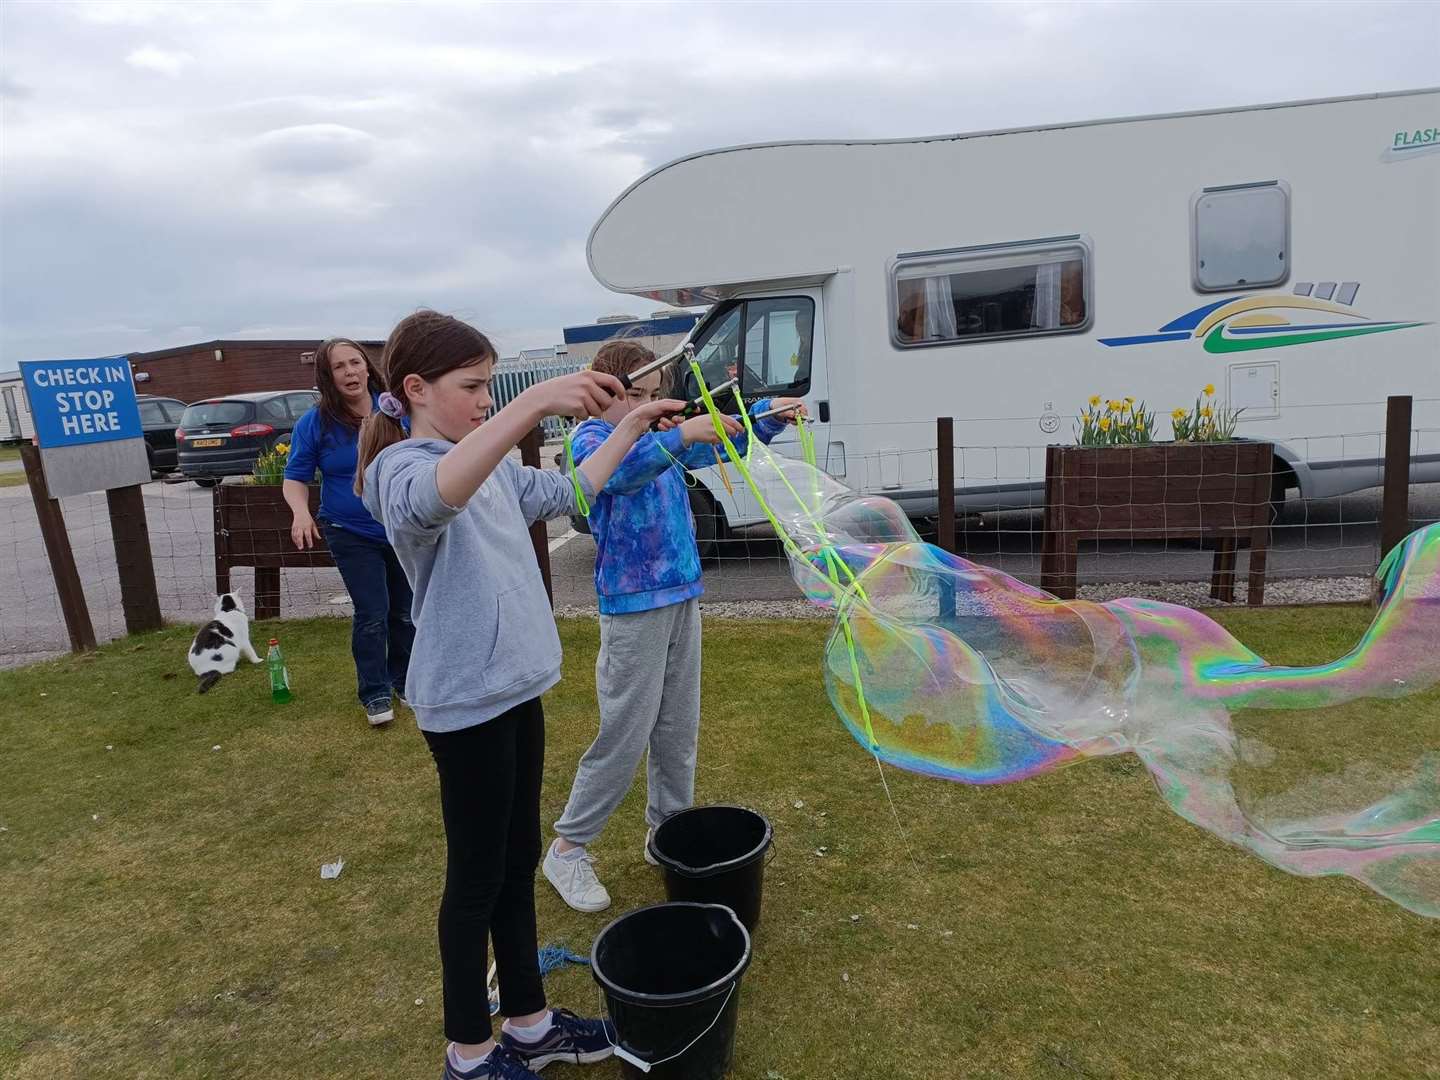 Giant bubble blowing proved to be a popular activity.